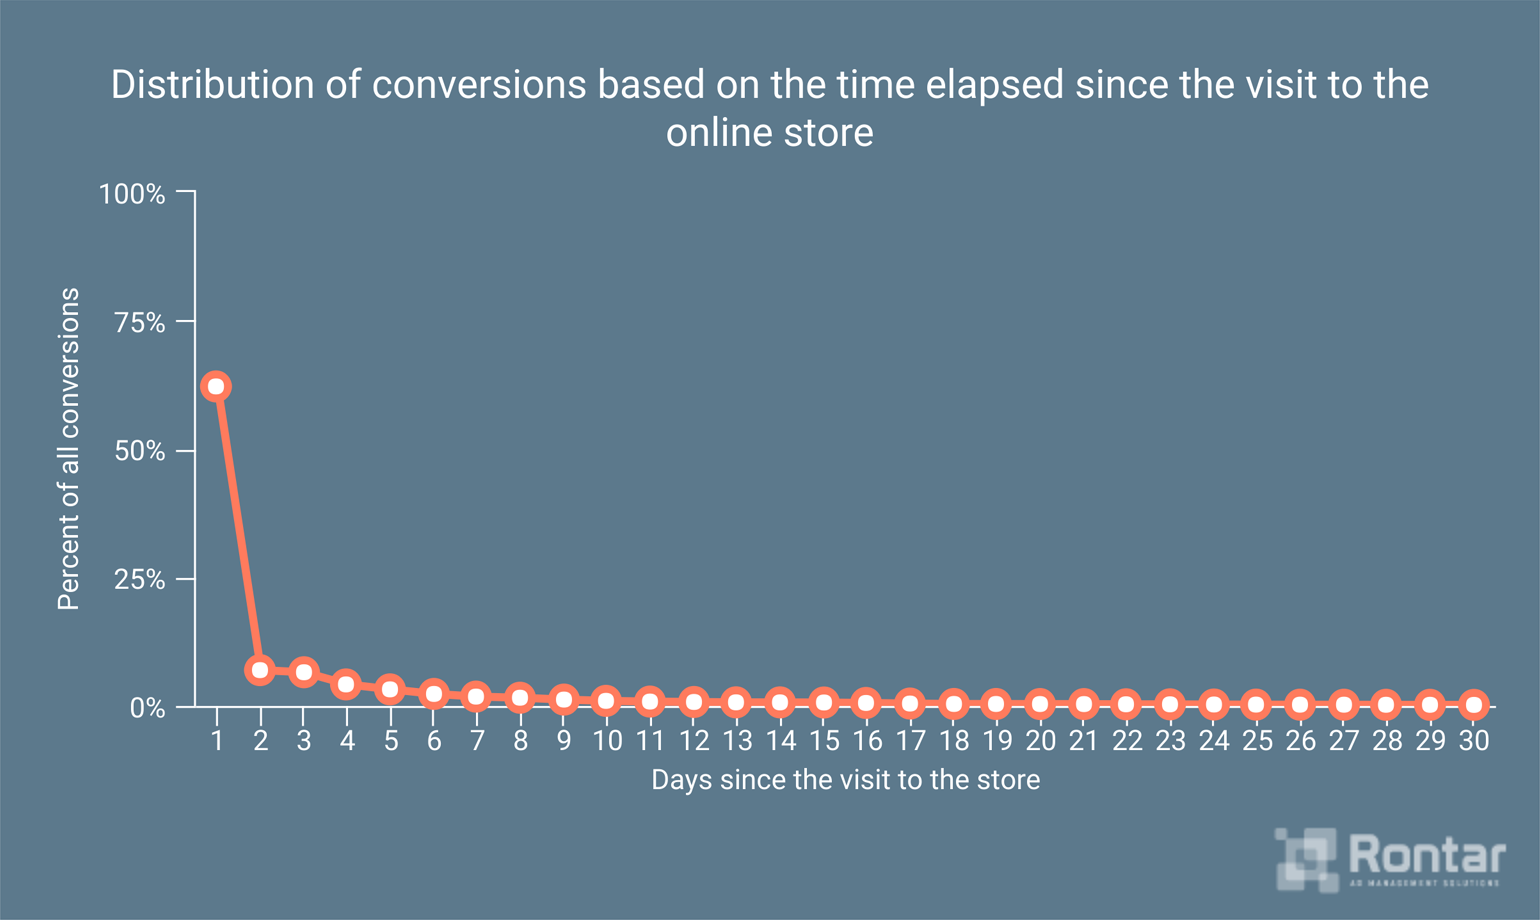 Distribution of conversions based on the time elapsed since the visit to the online store